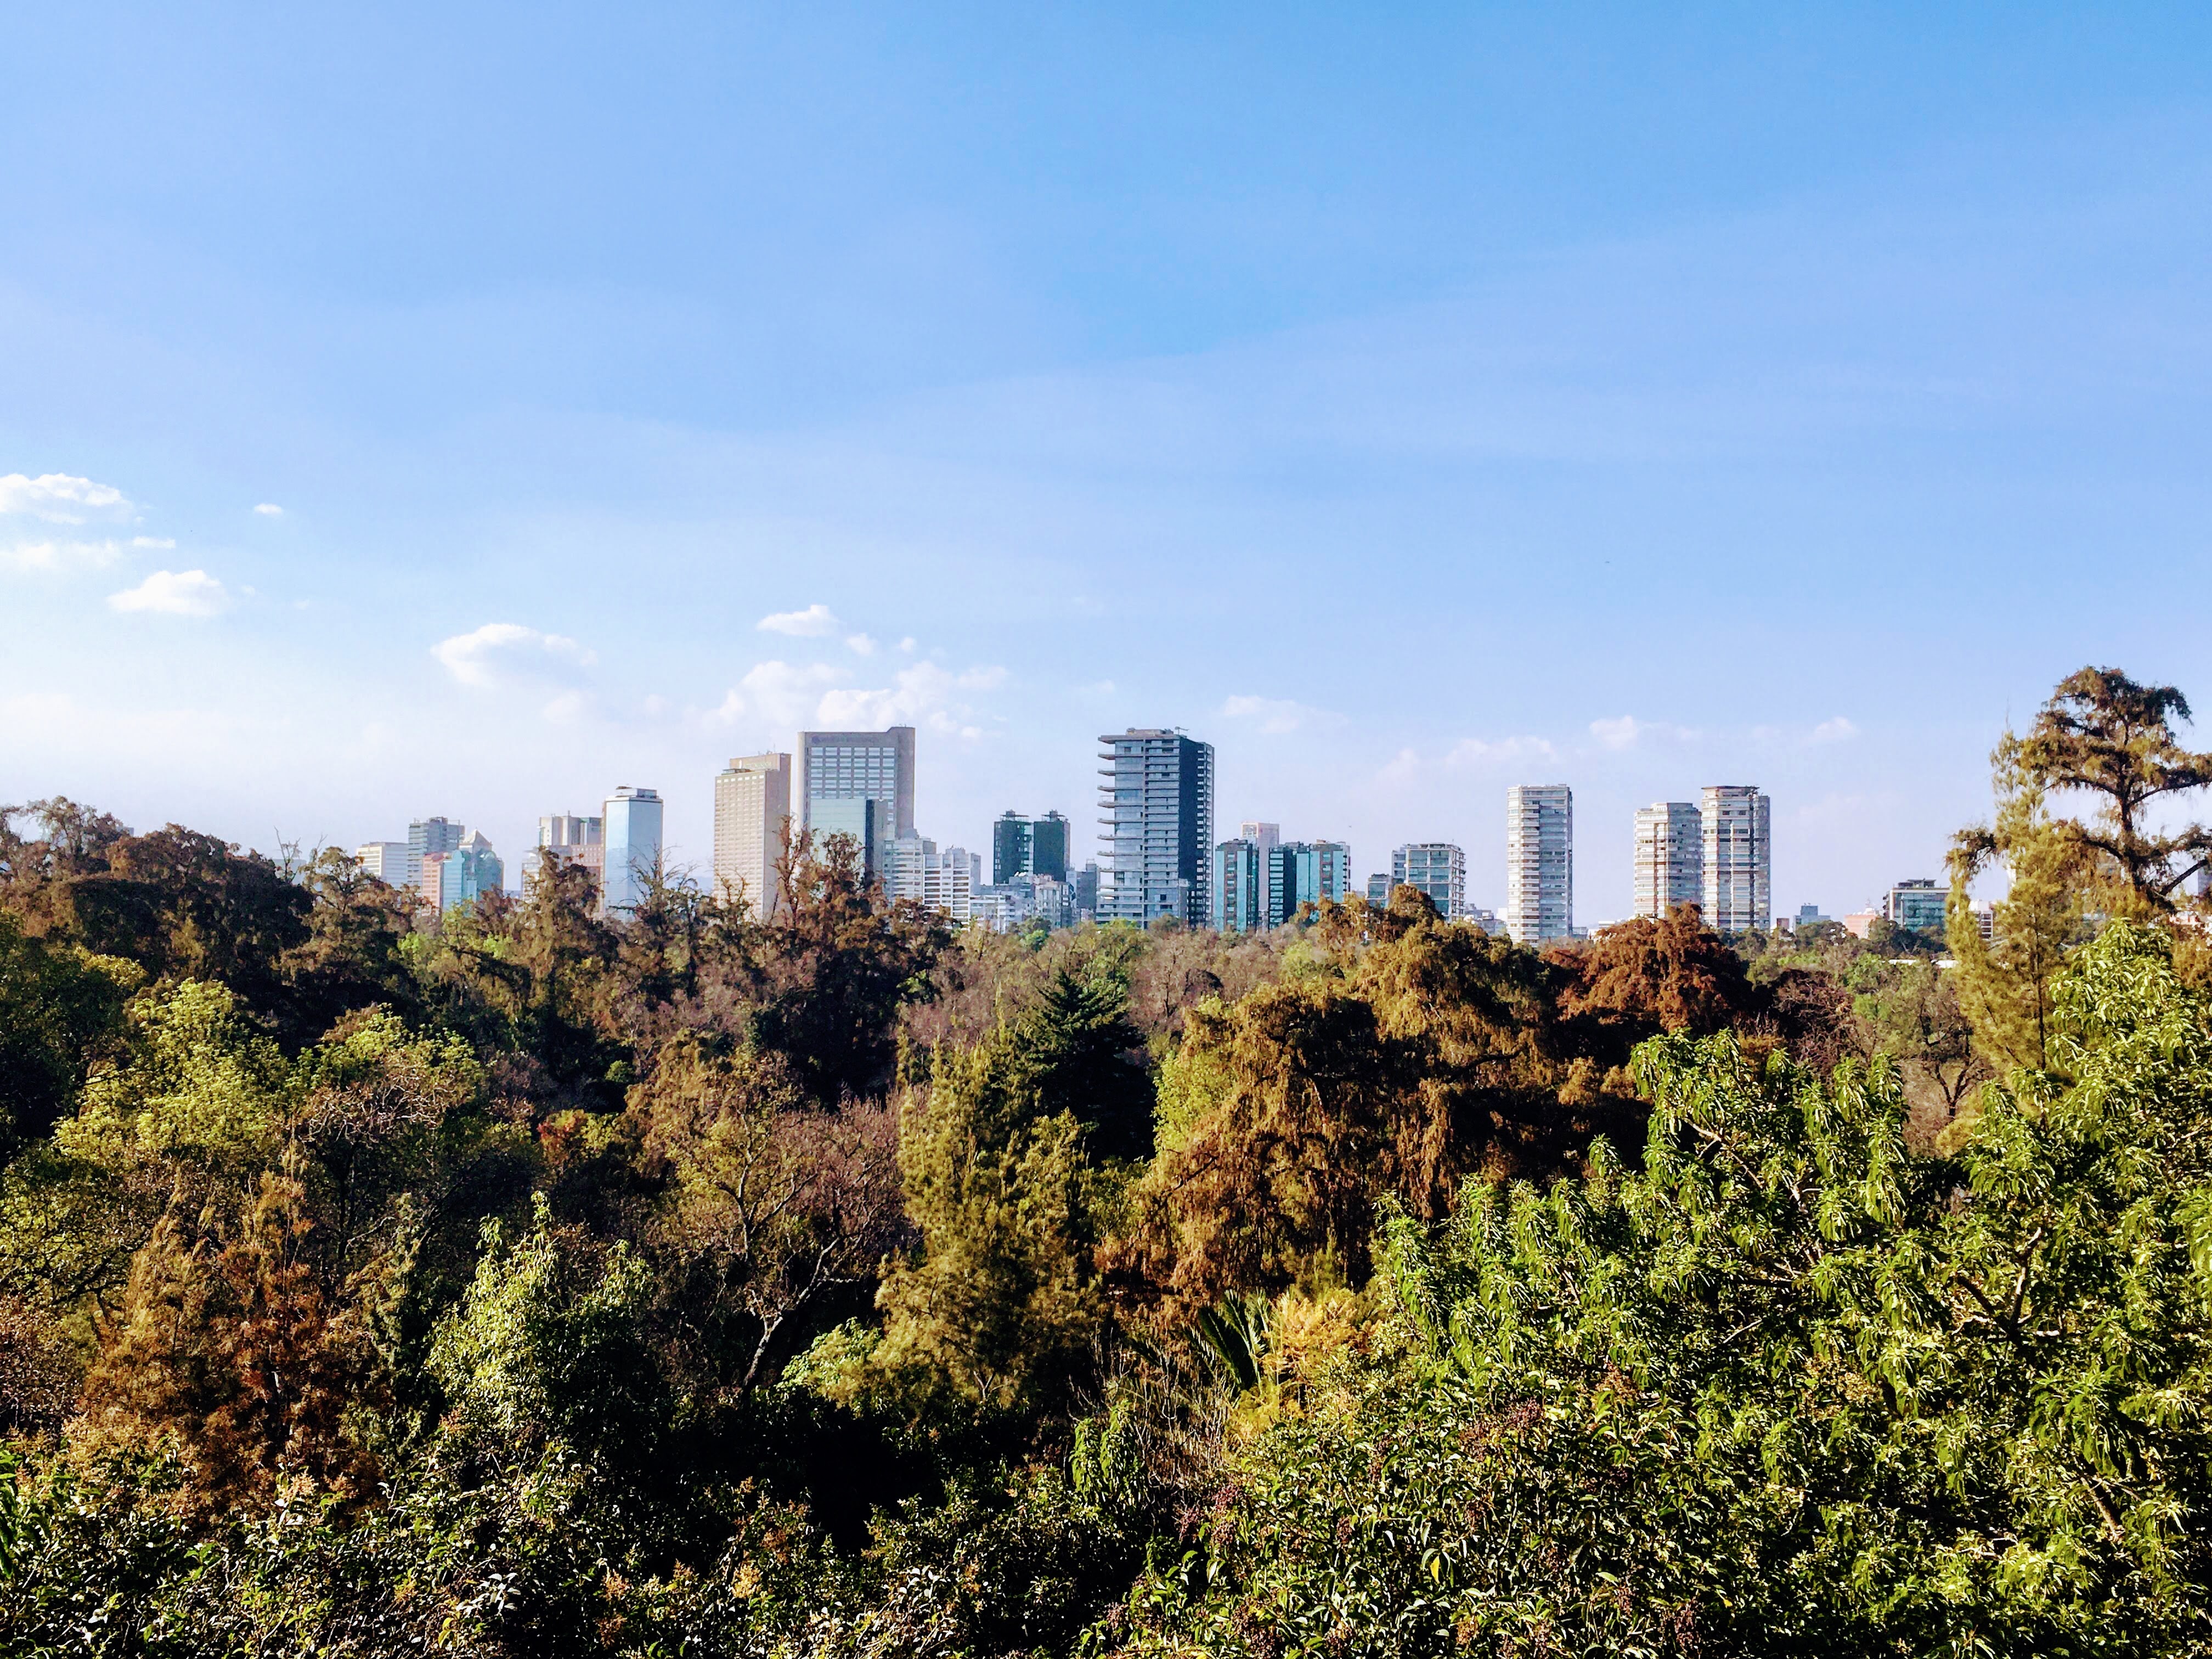 Mexico City skyline and urban forest; Photo: Amy Hubbard